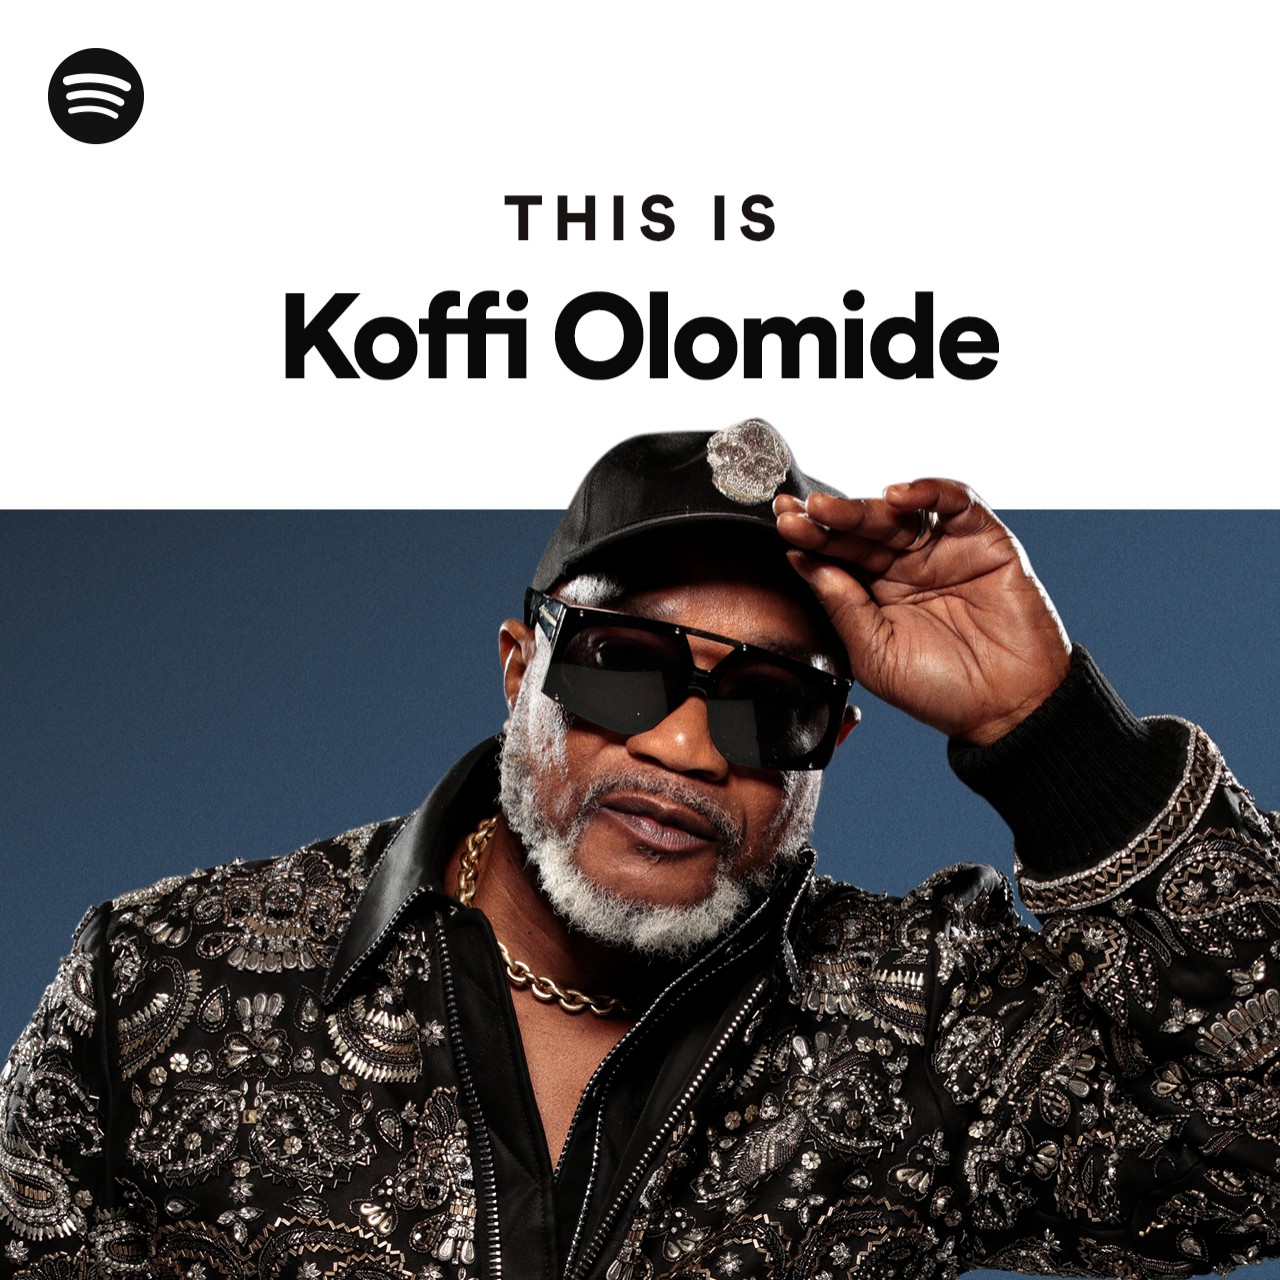 This Is Koffi Olomide